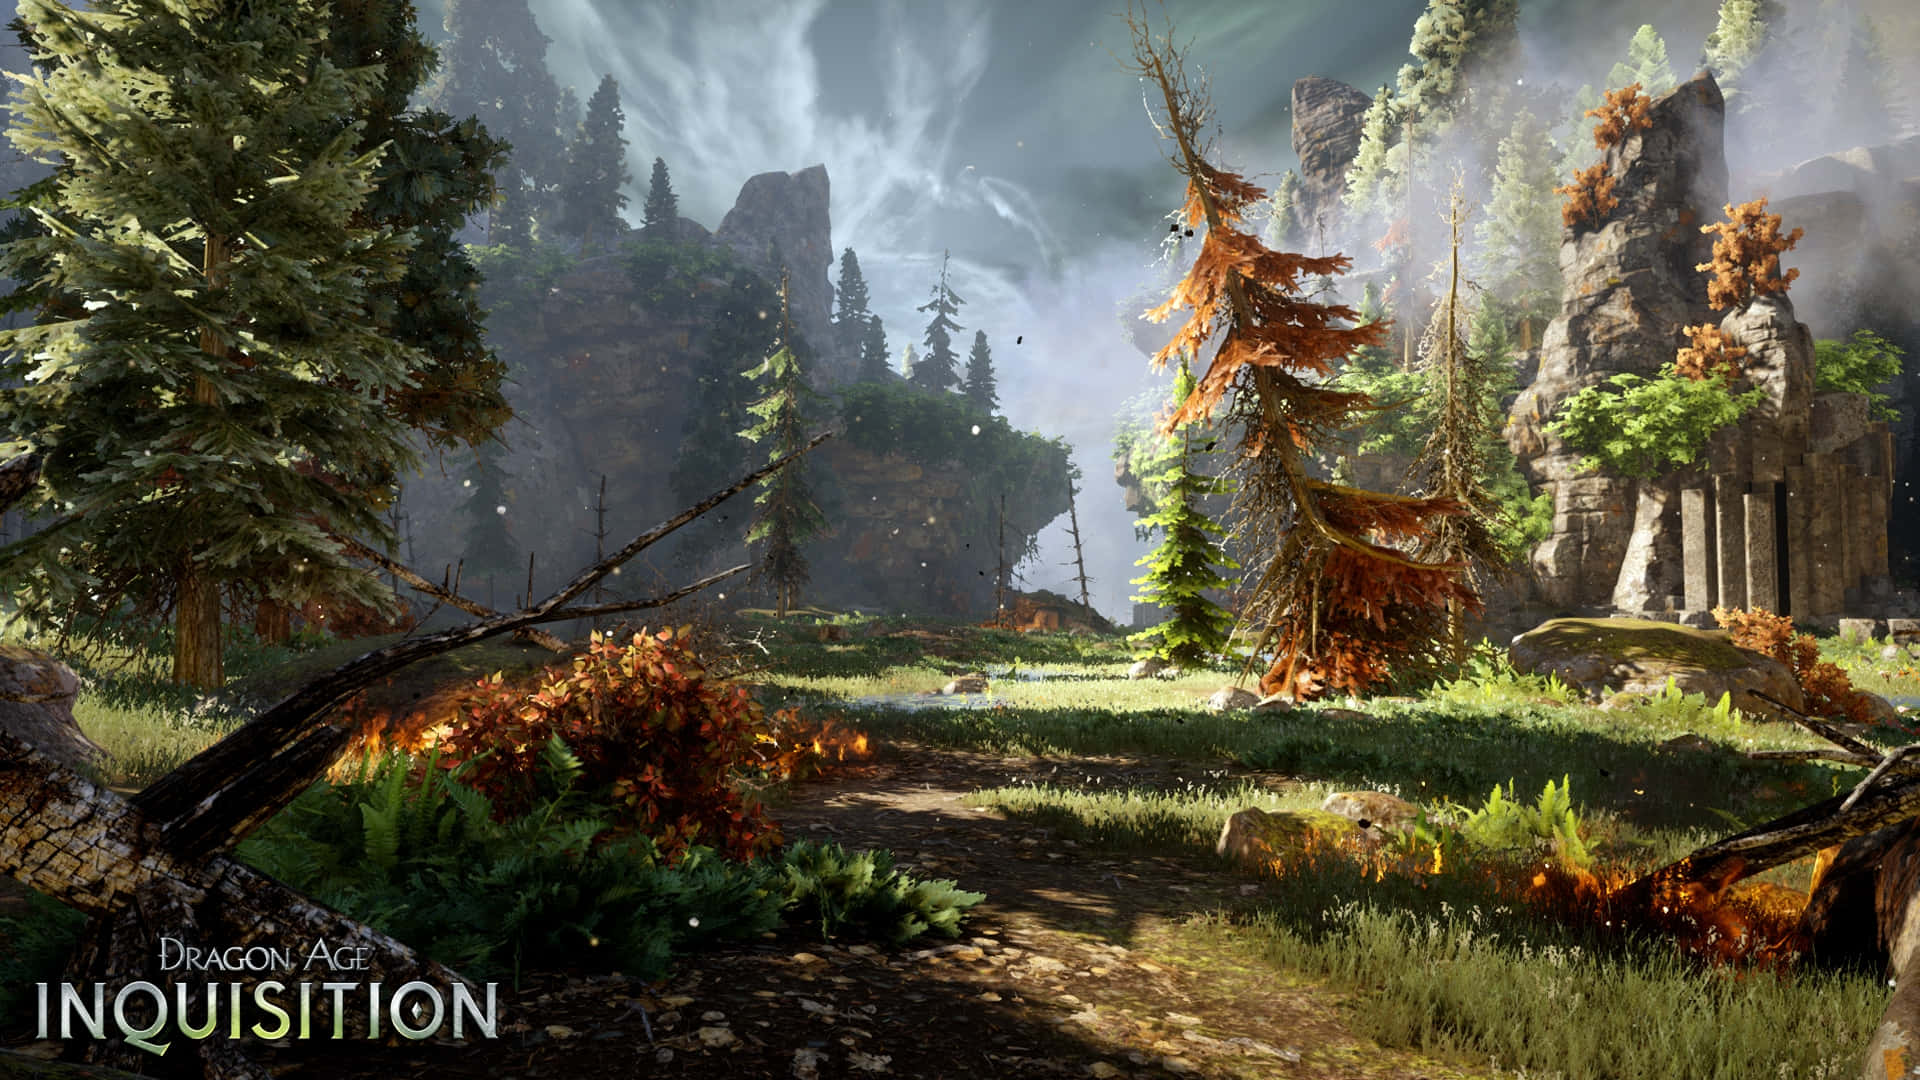 "Explore The Land Of Thedas In Dragon Age Inquisition"